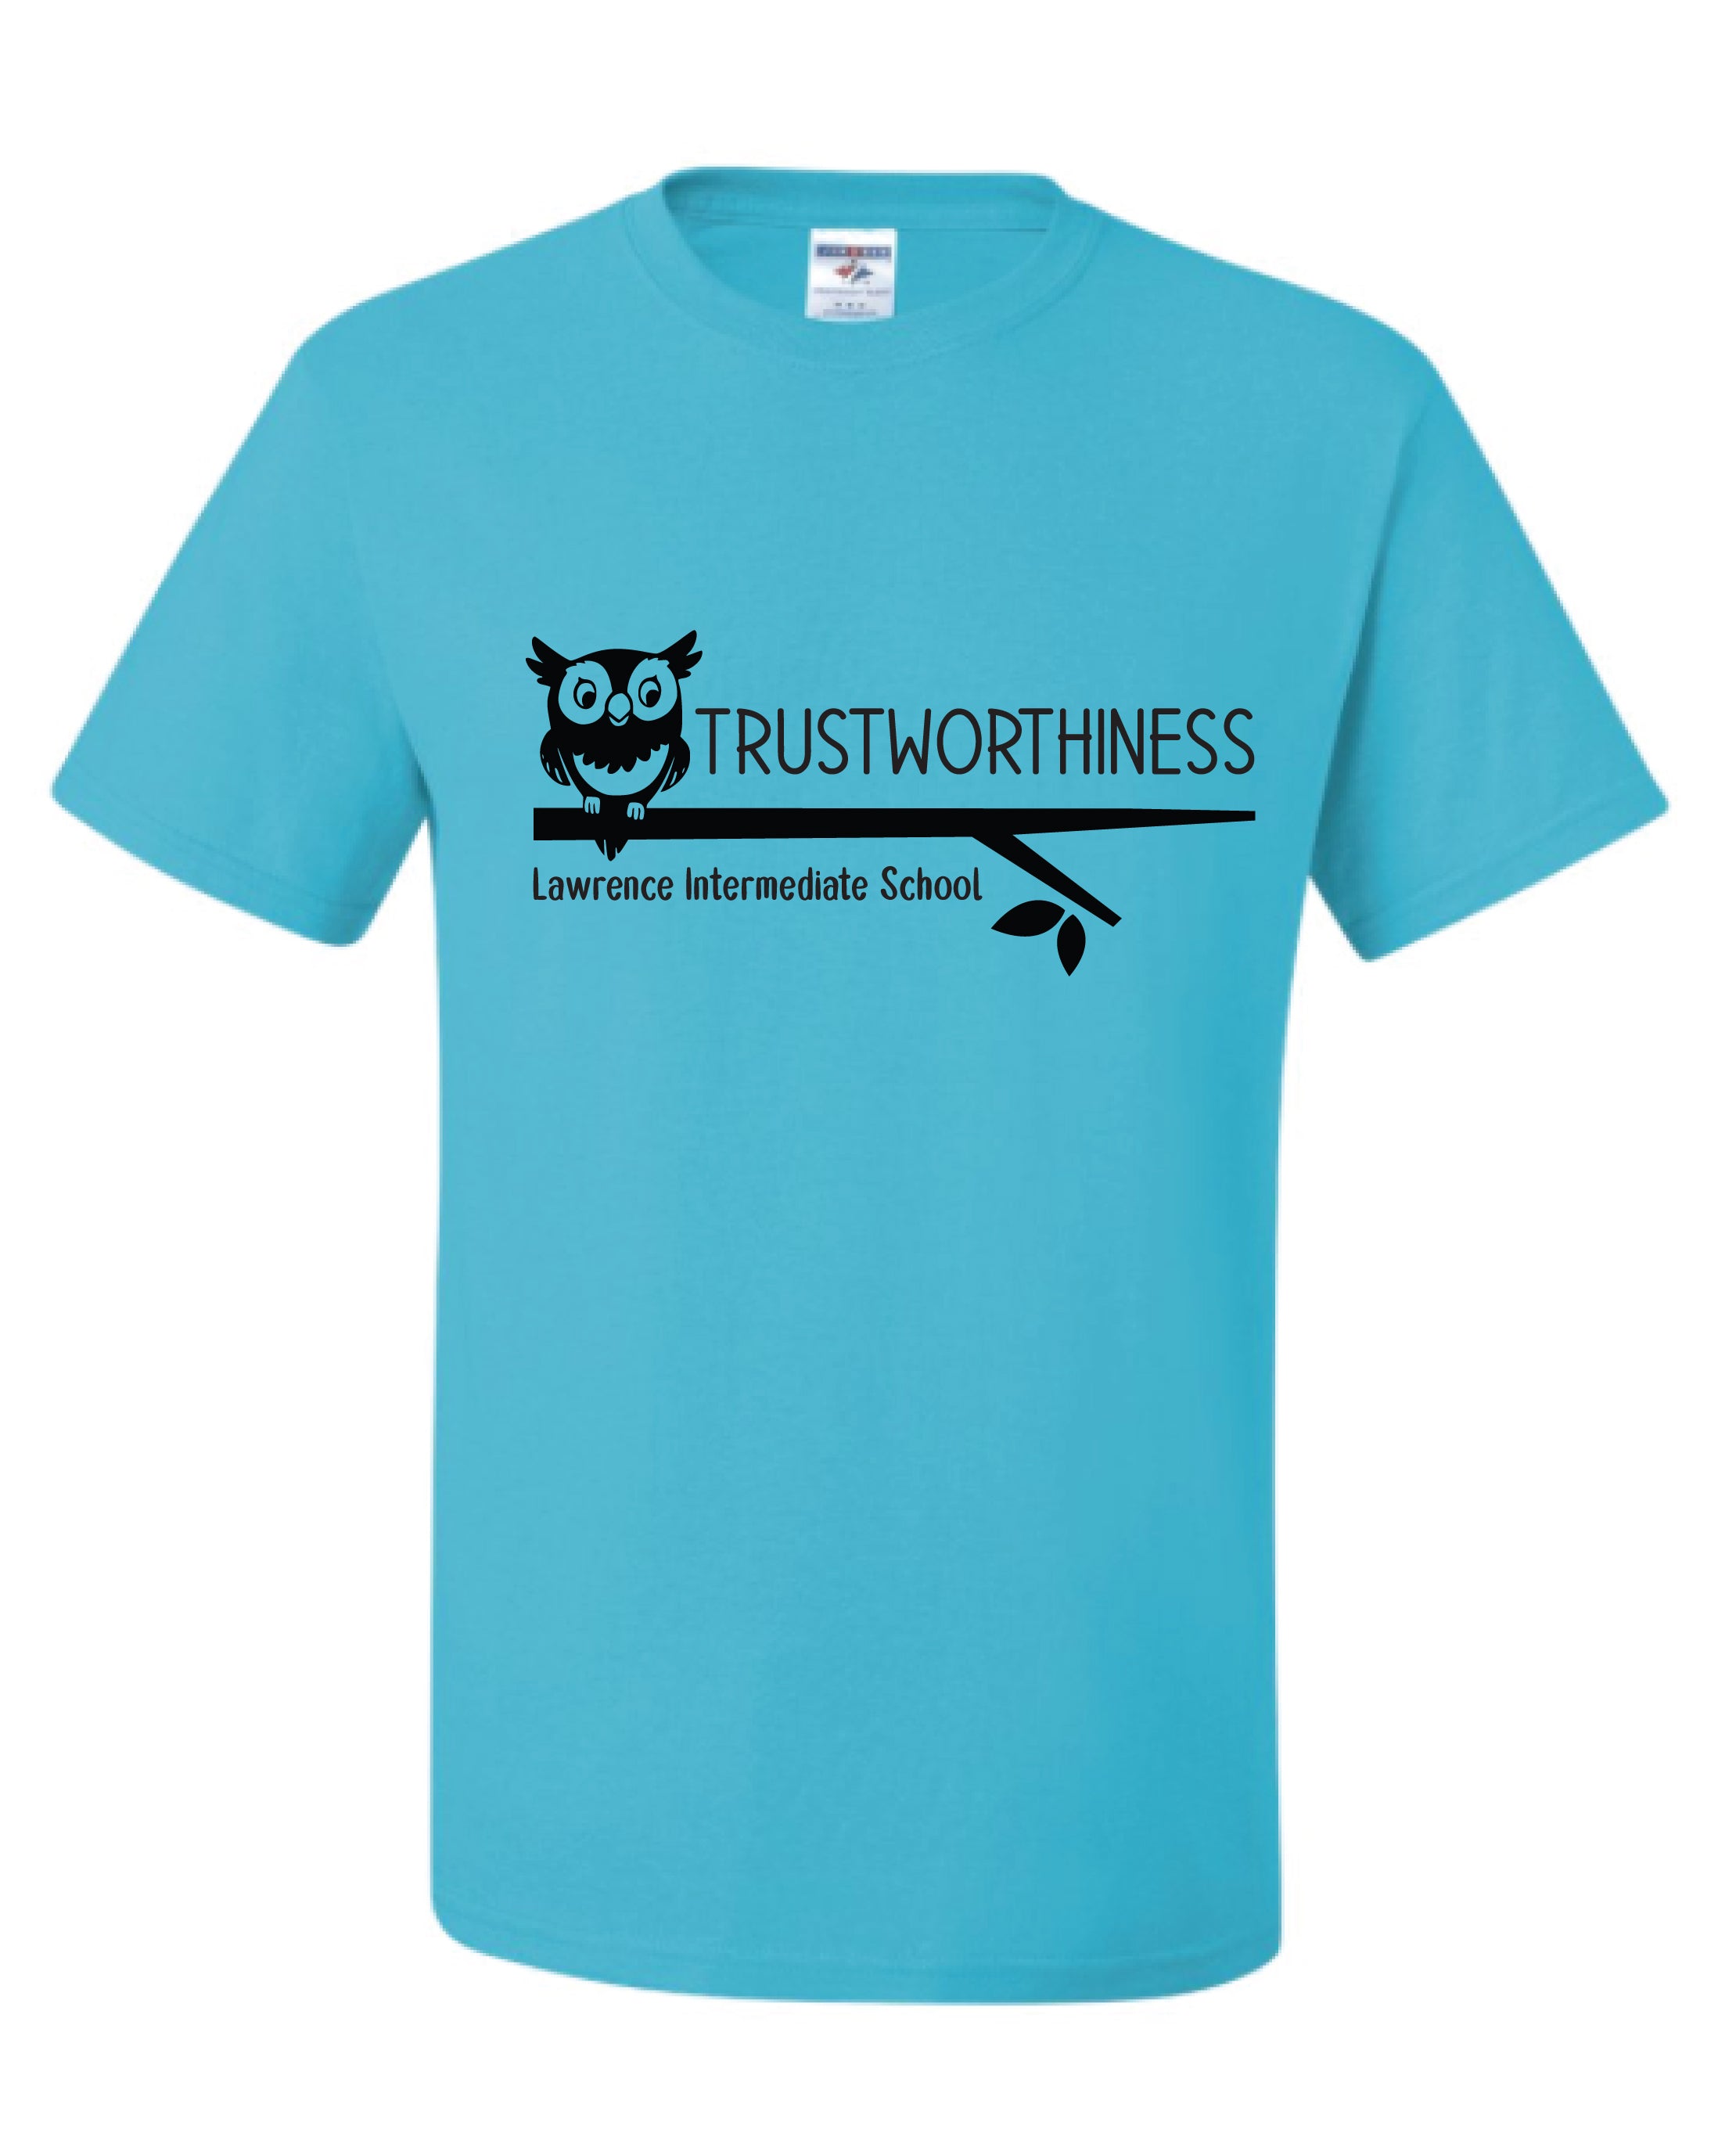 LIS Trustworthiness T-Shirt - Adult and Youth